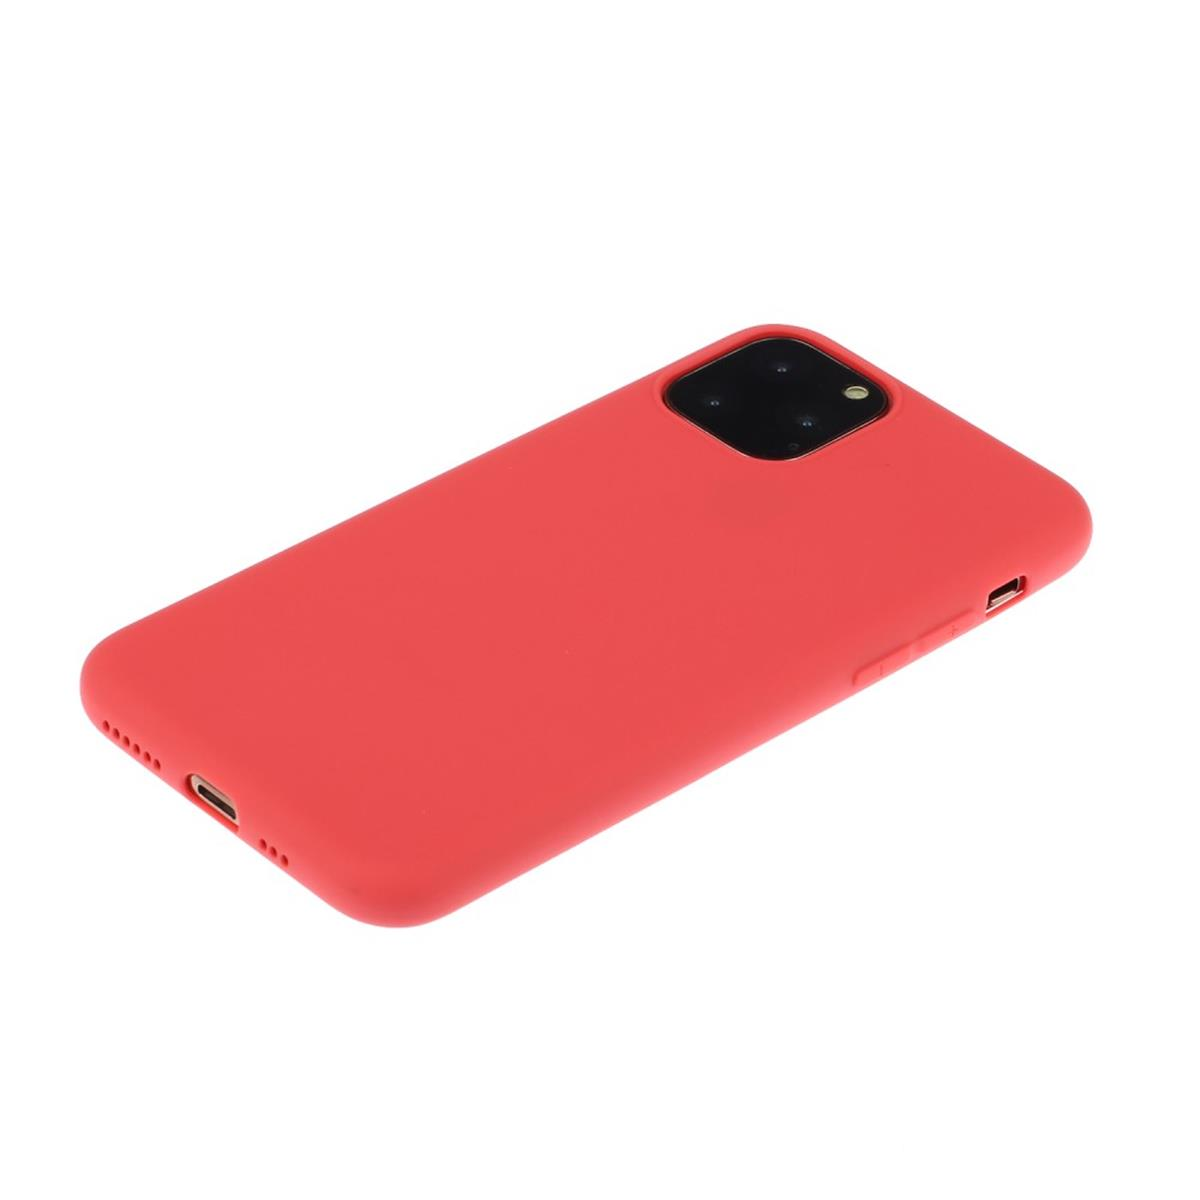 COVERKINGZ Handycase aus iPhone Silikon, Backcover, Pro 11 Max, Apple, Rot